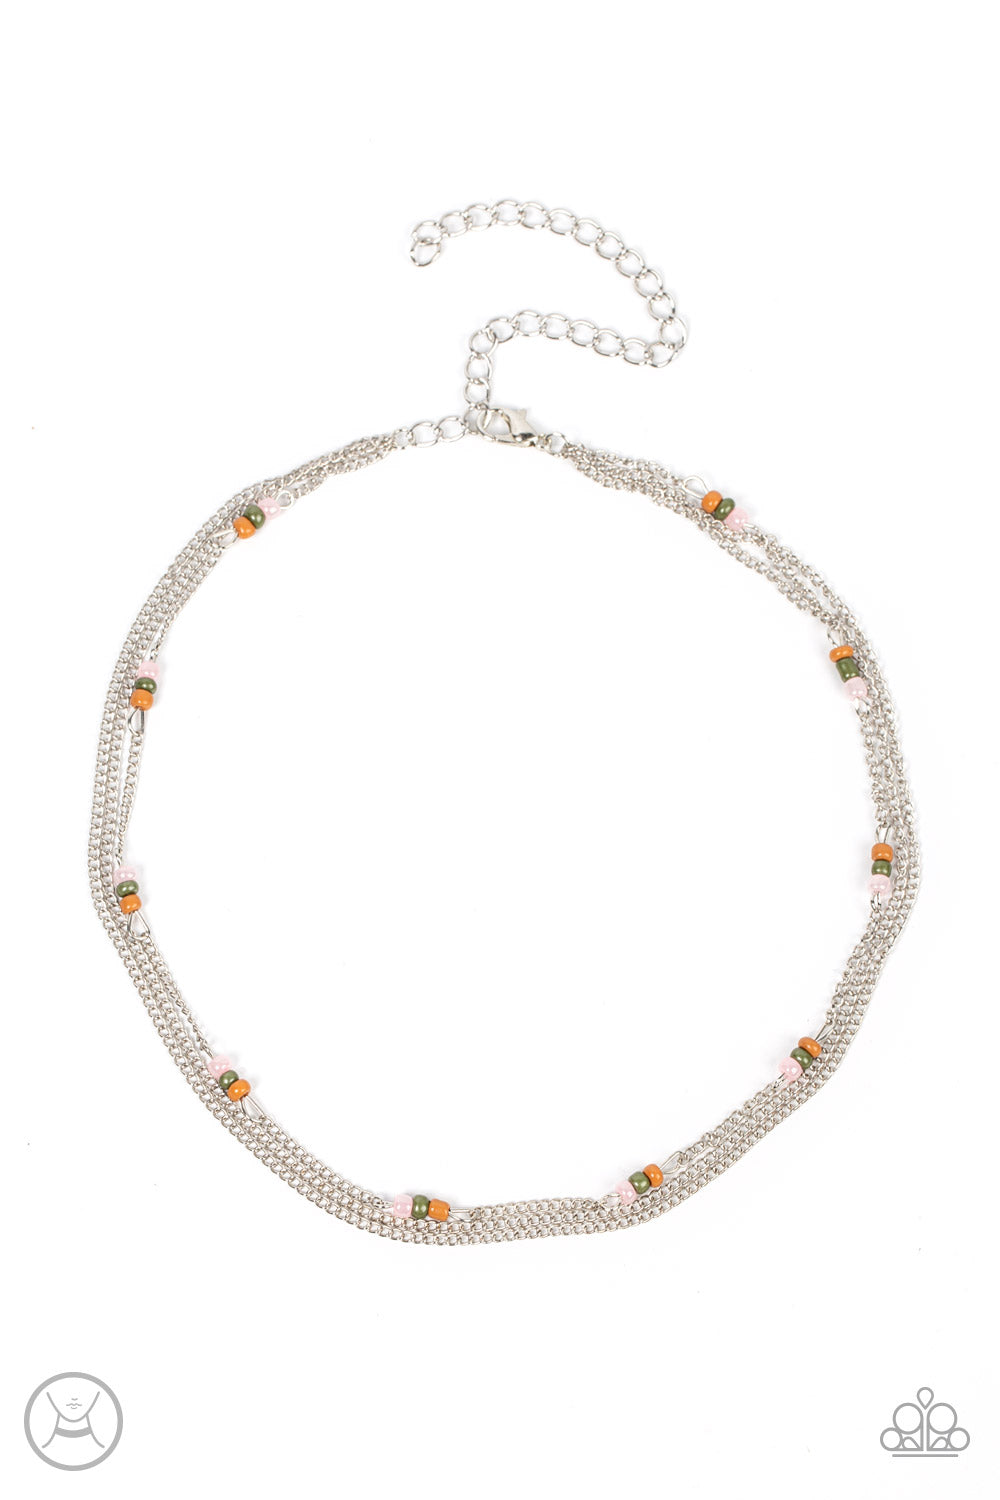 Bountifully Beaded - Multi Seed Beads/Dainty Silver Chain Paparazzi Necklace & matching earrings